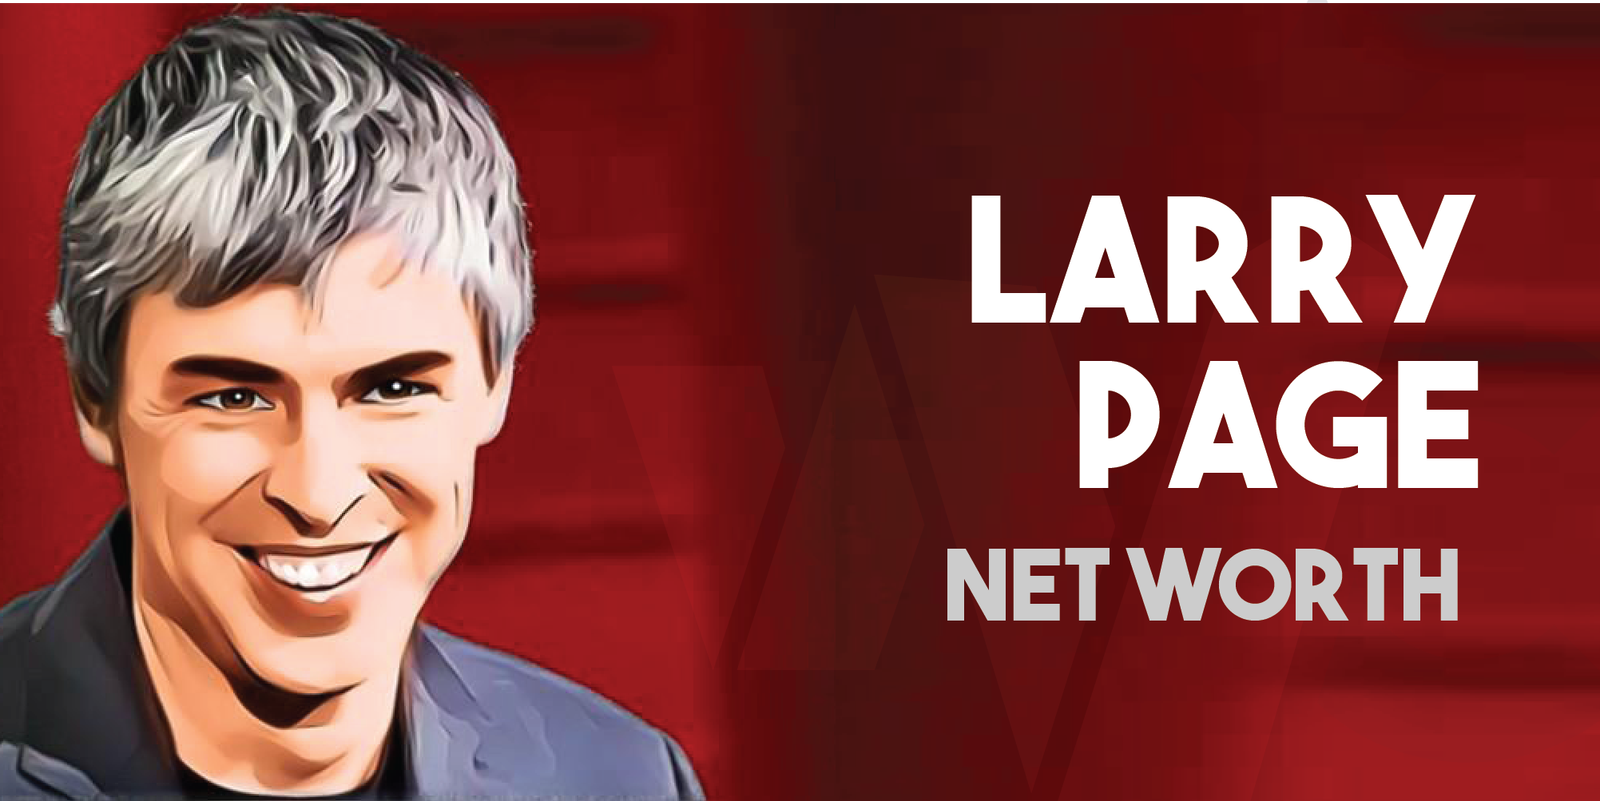 What is Larry Page Net Worth? – All About Google’s Co-Founder